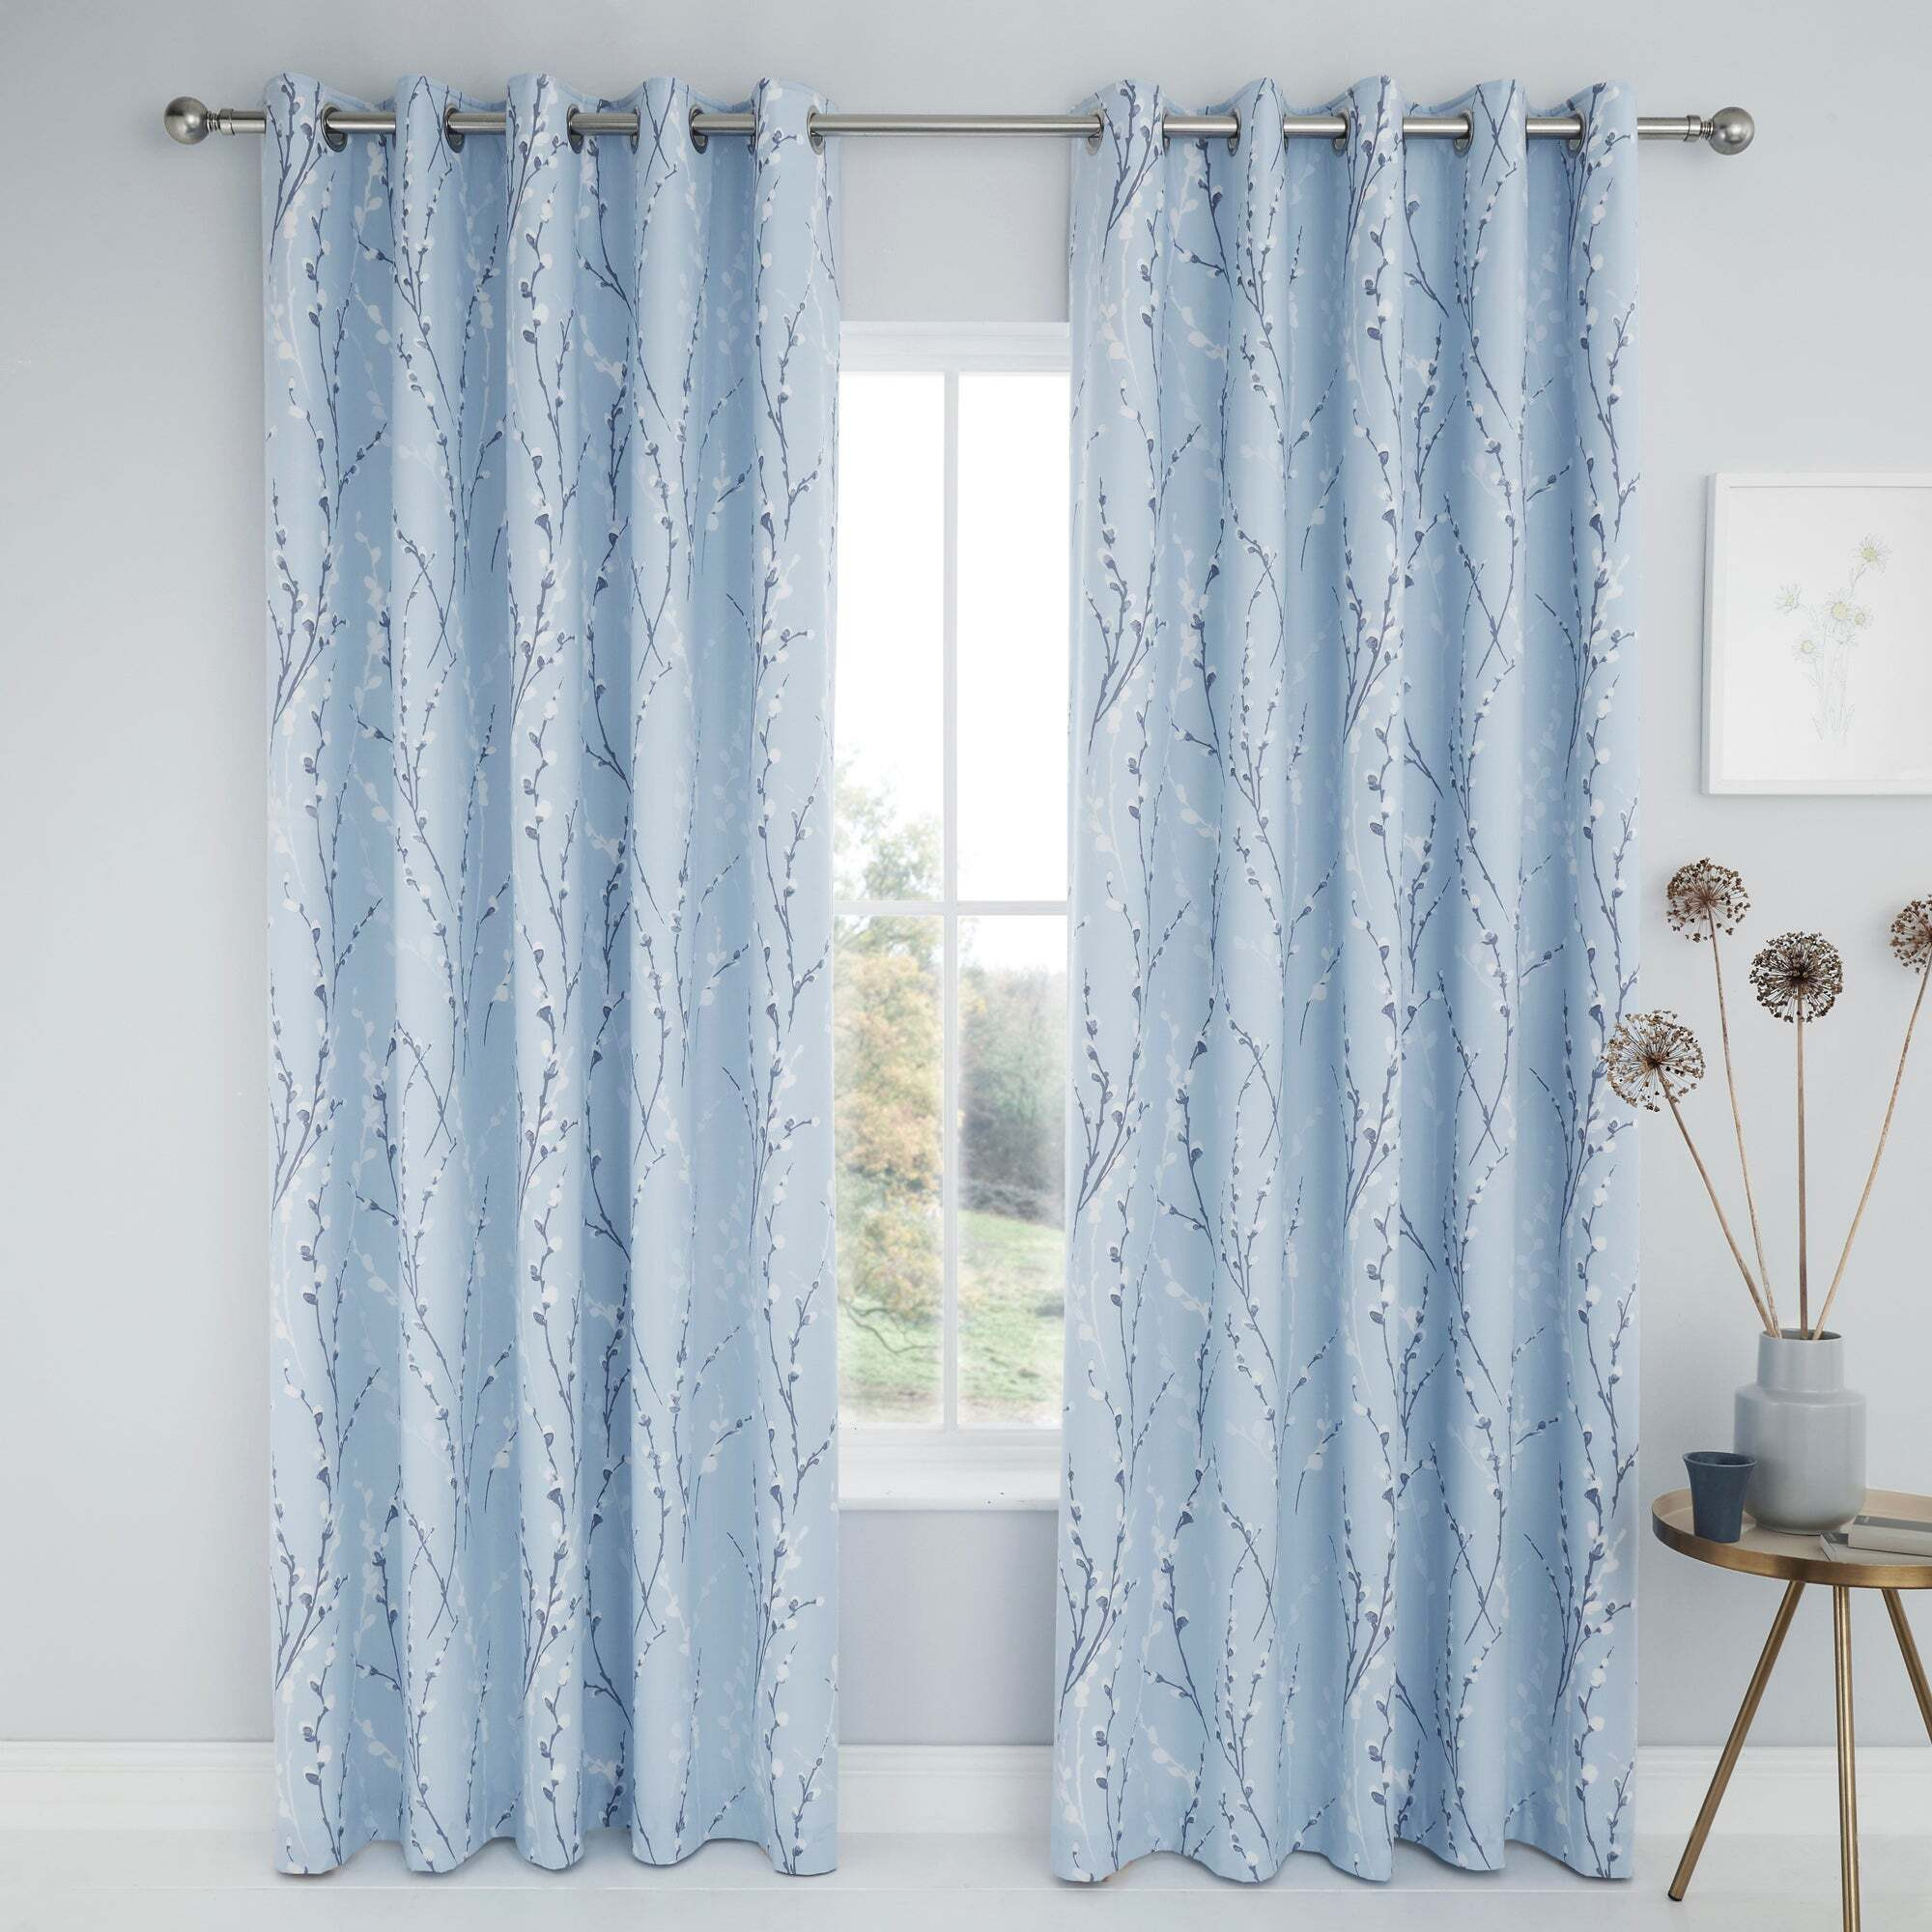 Belle Blue Blackout Eyelet Curtains Blue and White